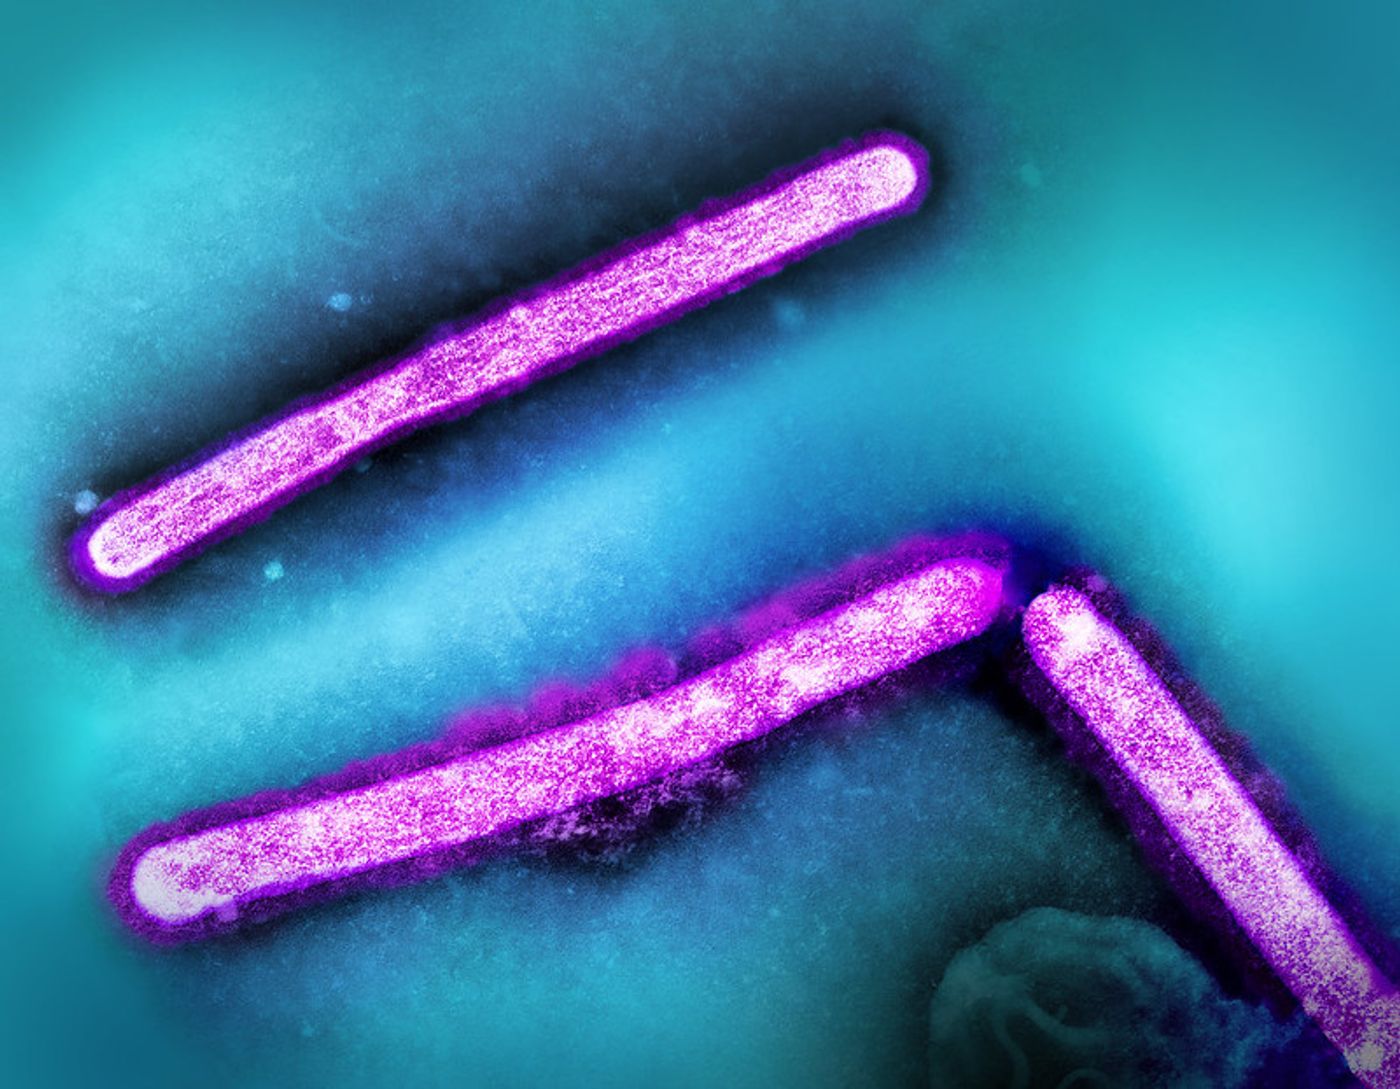 Three influenza A (H5N1/bird flu) virus particles (rod-shaped; pink). Note: Layout incorporates two CDC transmission electron micrographs that have been repositioned and colorized by NIAID. Scale has been modified. Credit: CDC and NIAID